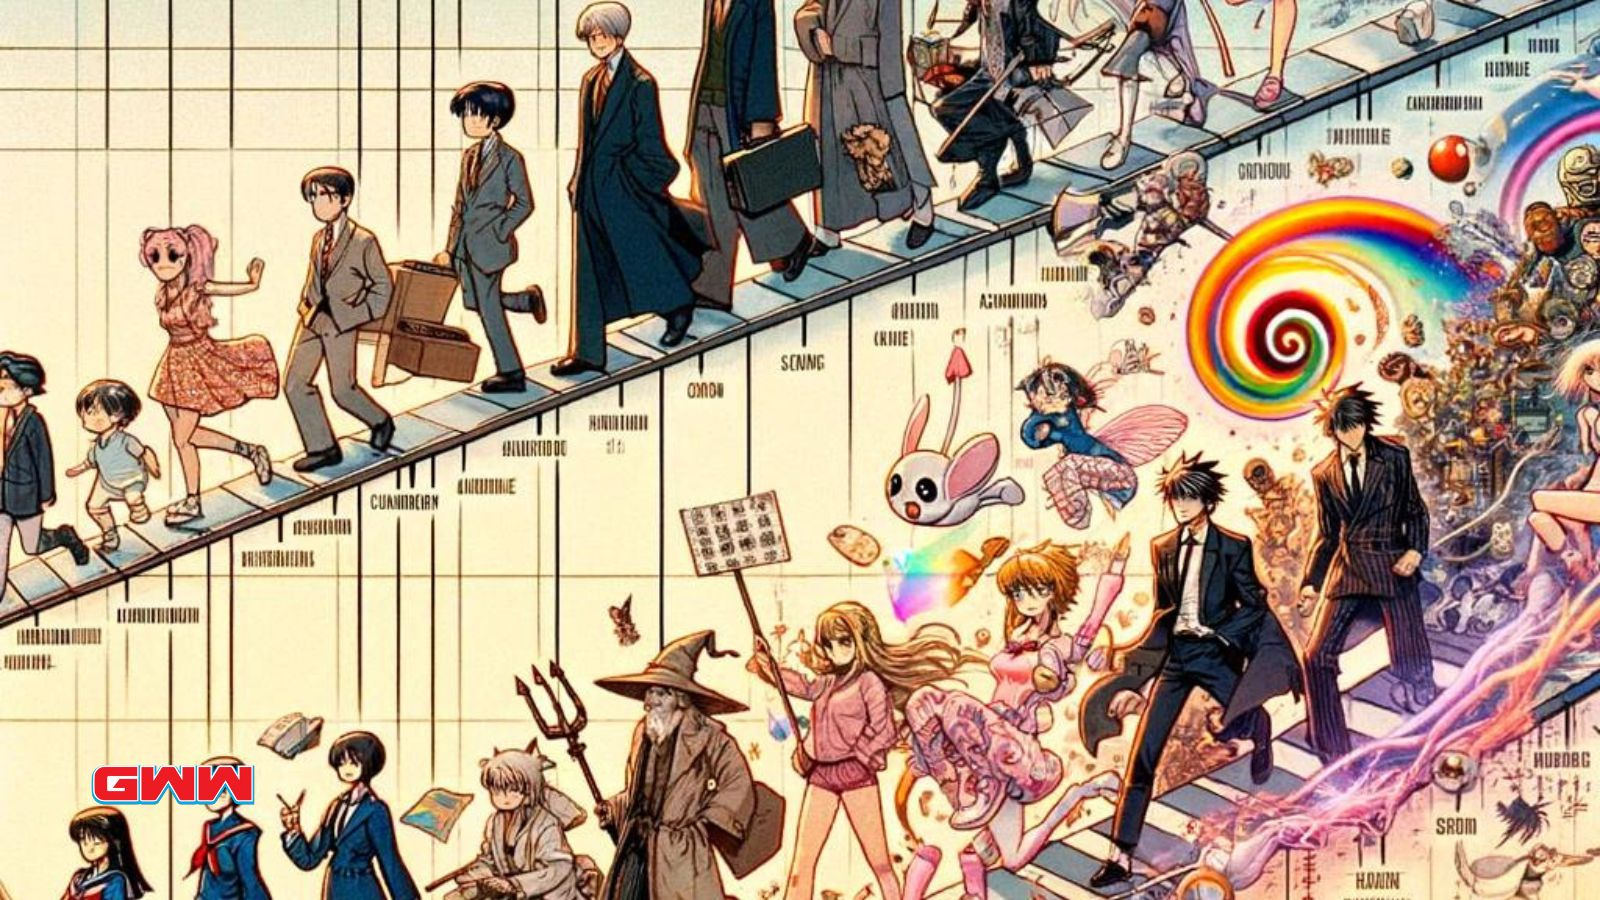 Anime GIF history timeline with evolving characters